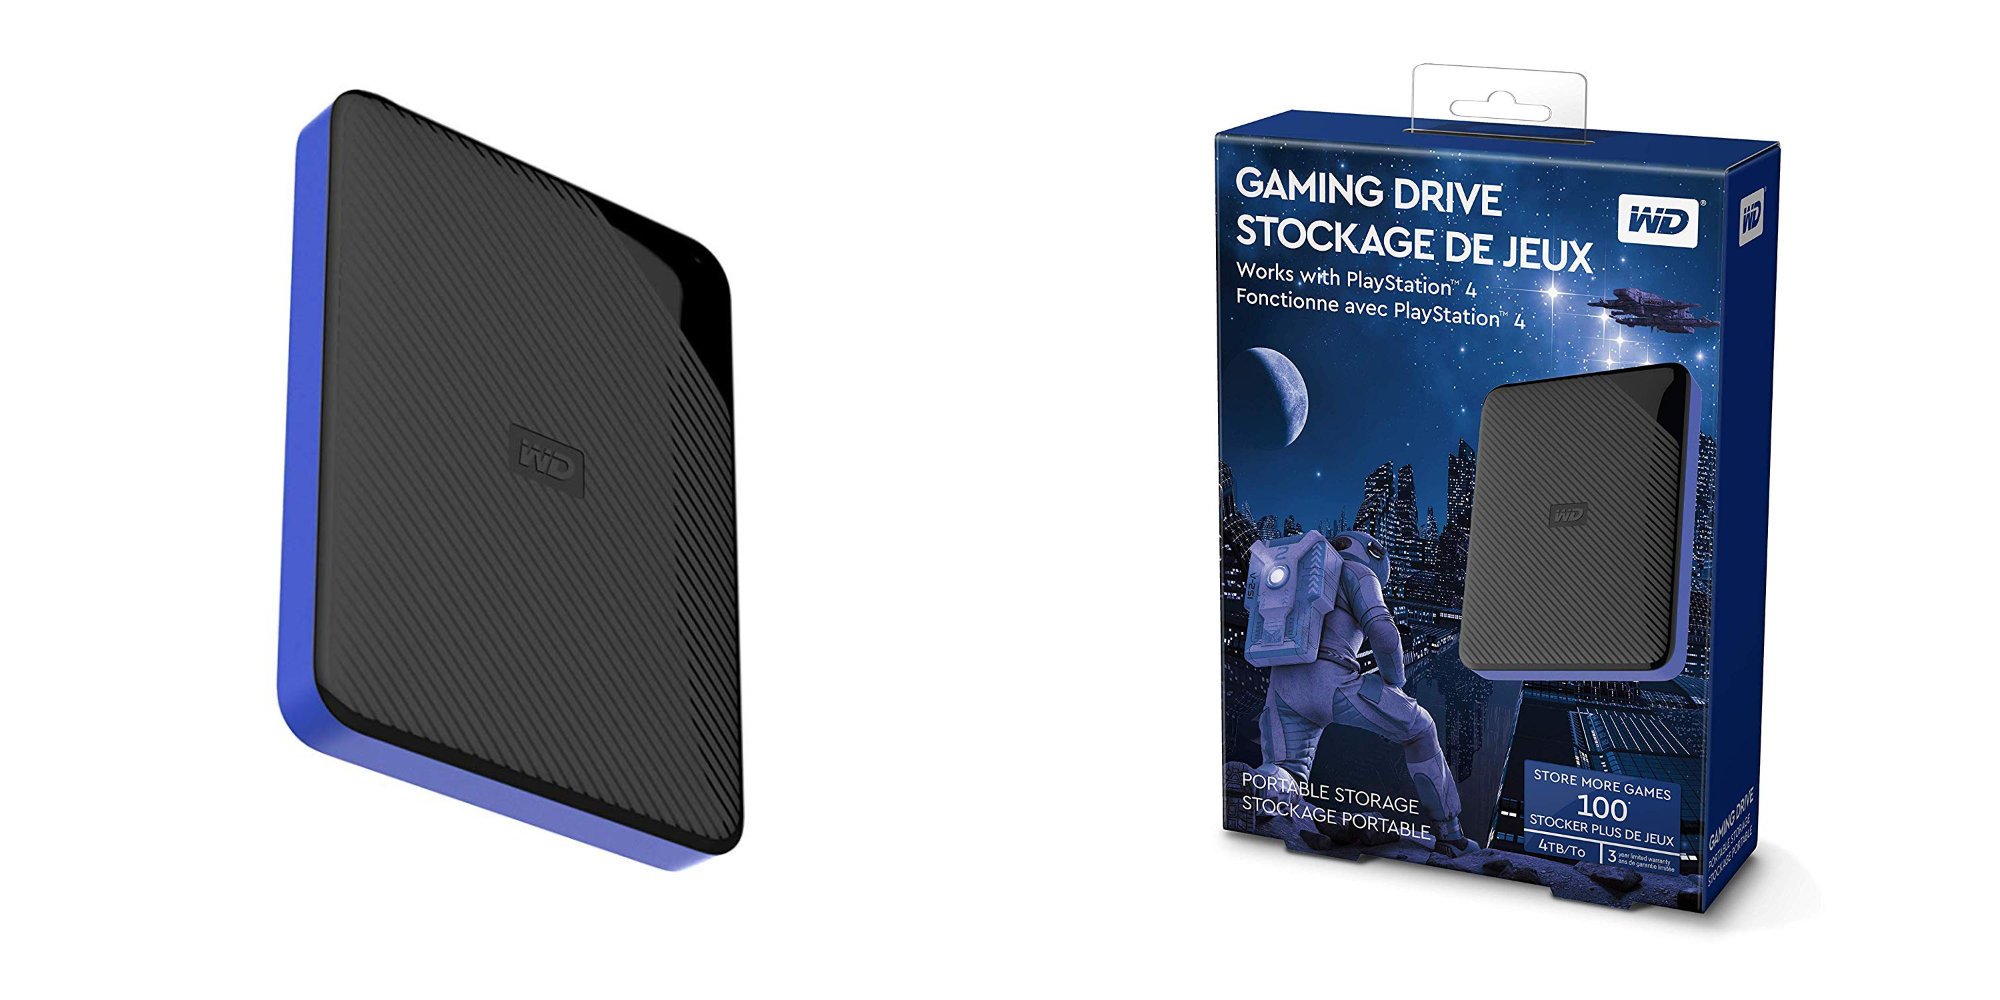 WD Gaming Drive 4tb. WD games. WD game backpicture. Как сайднит игровой WD 184. Wd gaming drive